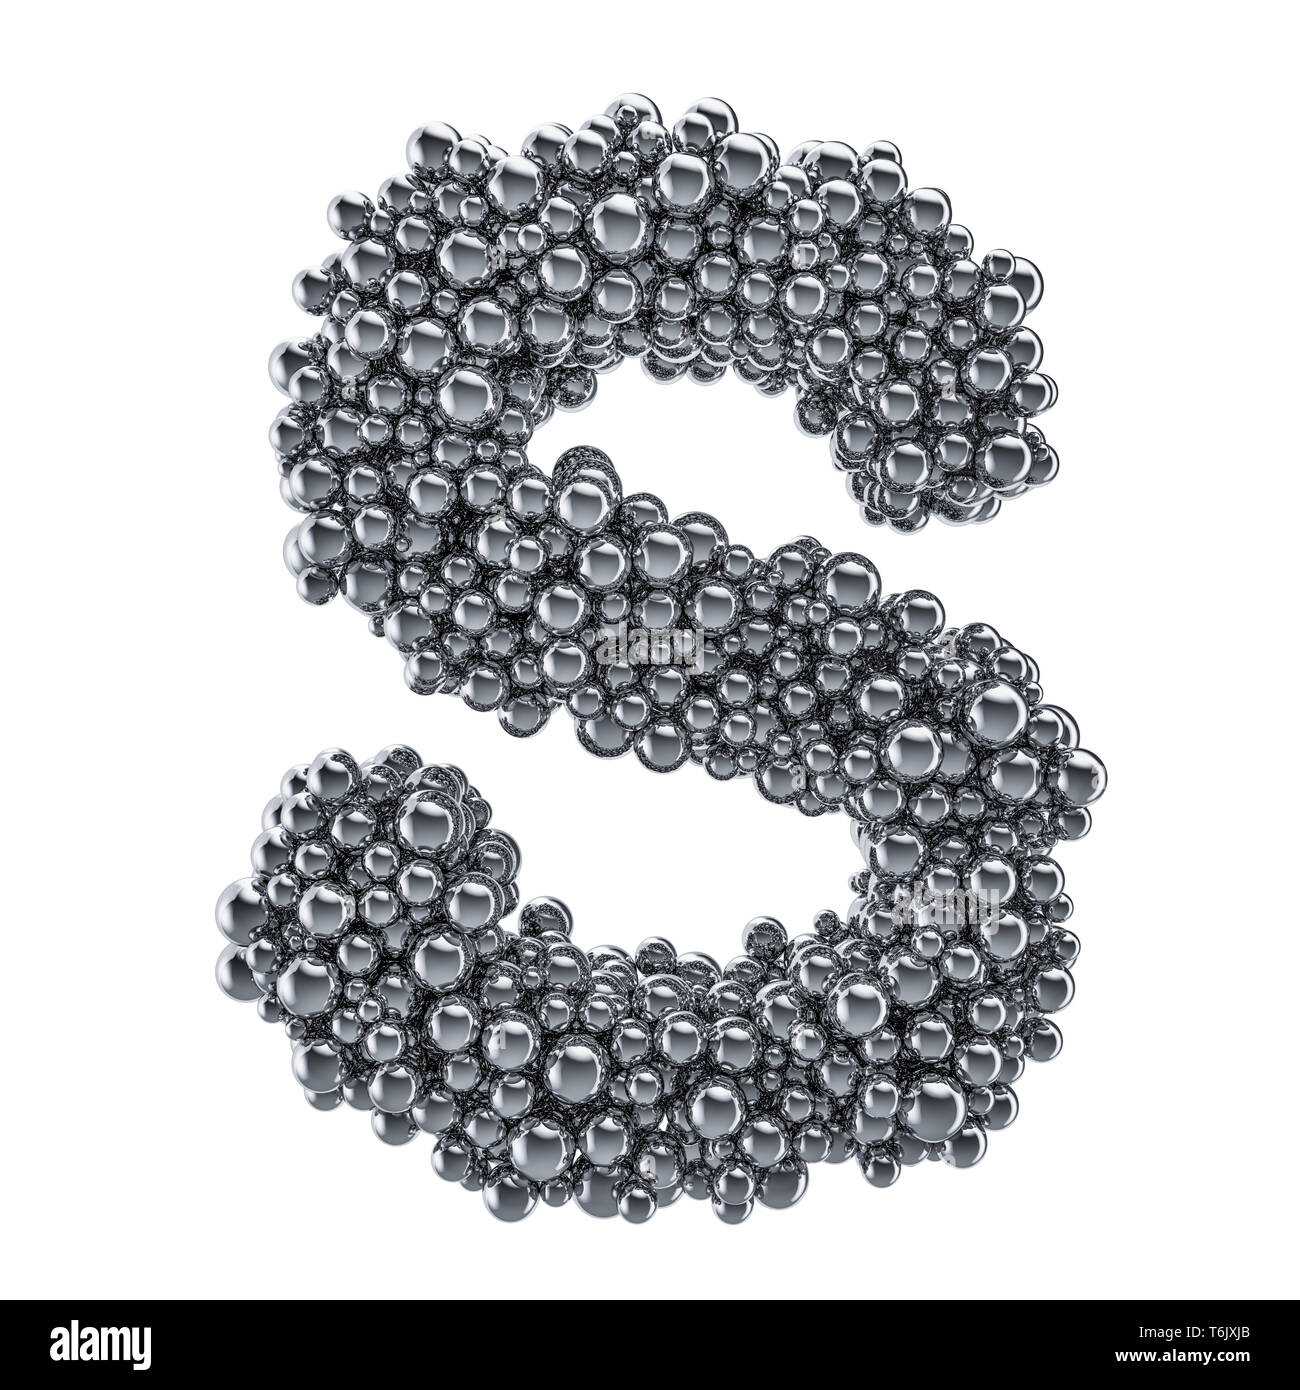 Metallic letter S from metal balls, 3D rendering isolated on white background Stock Photo